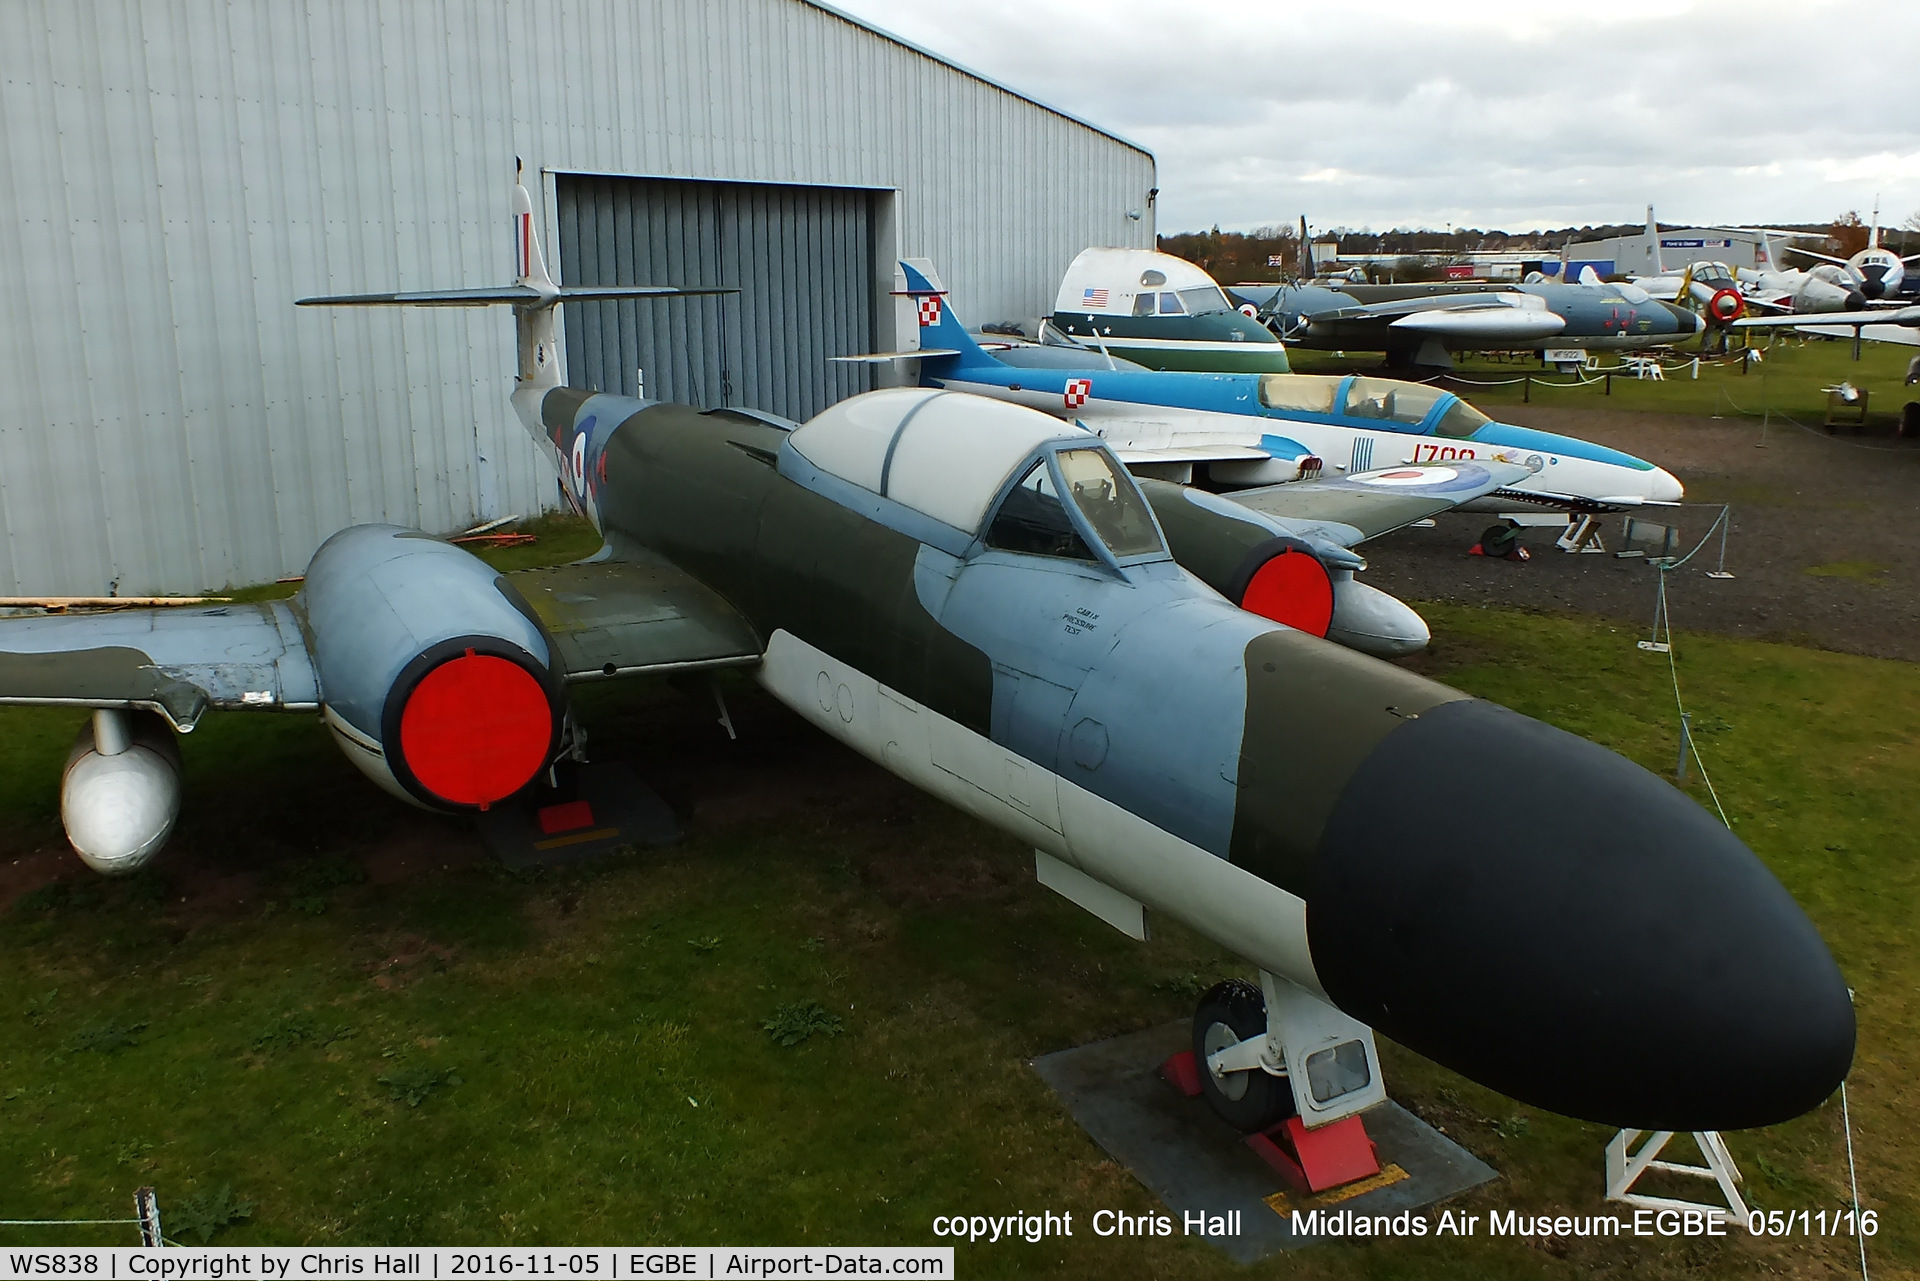 WS838, 1954 Gloster Meteor NF.14 C/N Not found WS838, preserved at the Midland Air Museum